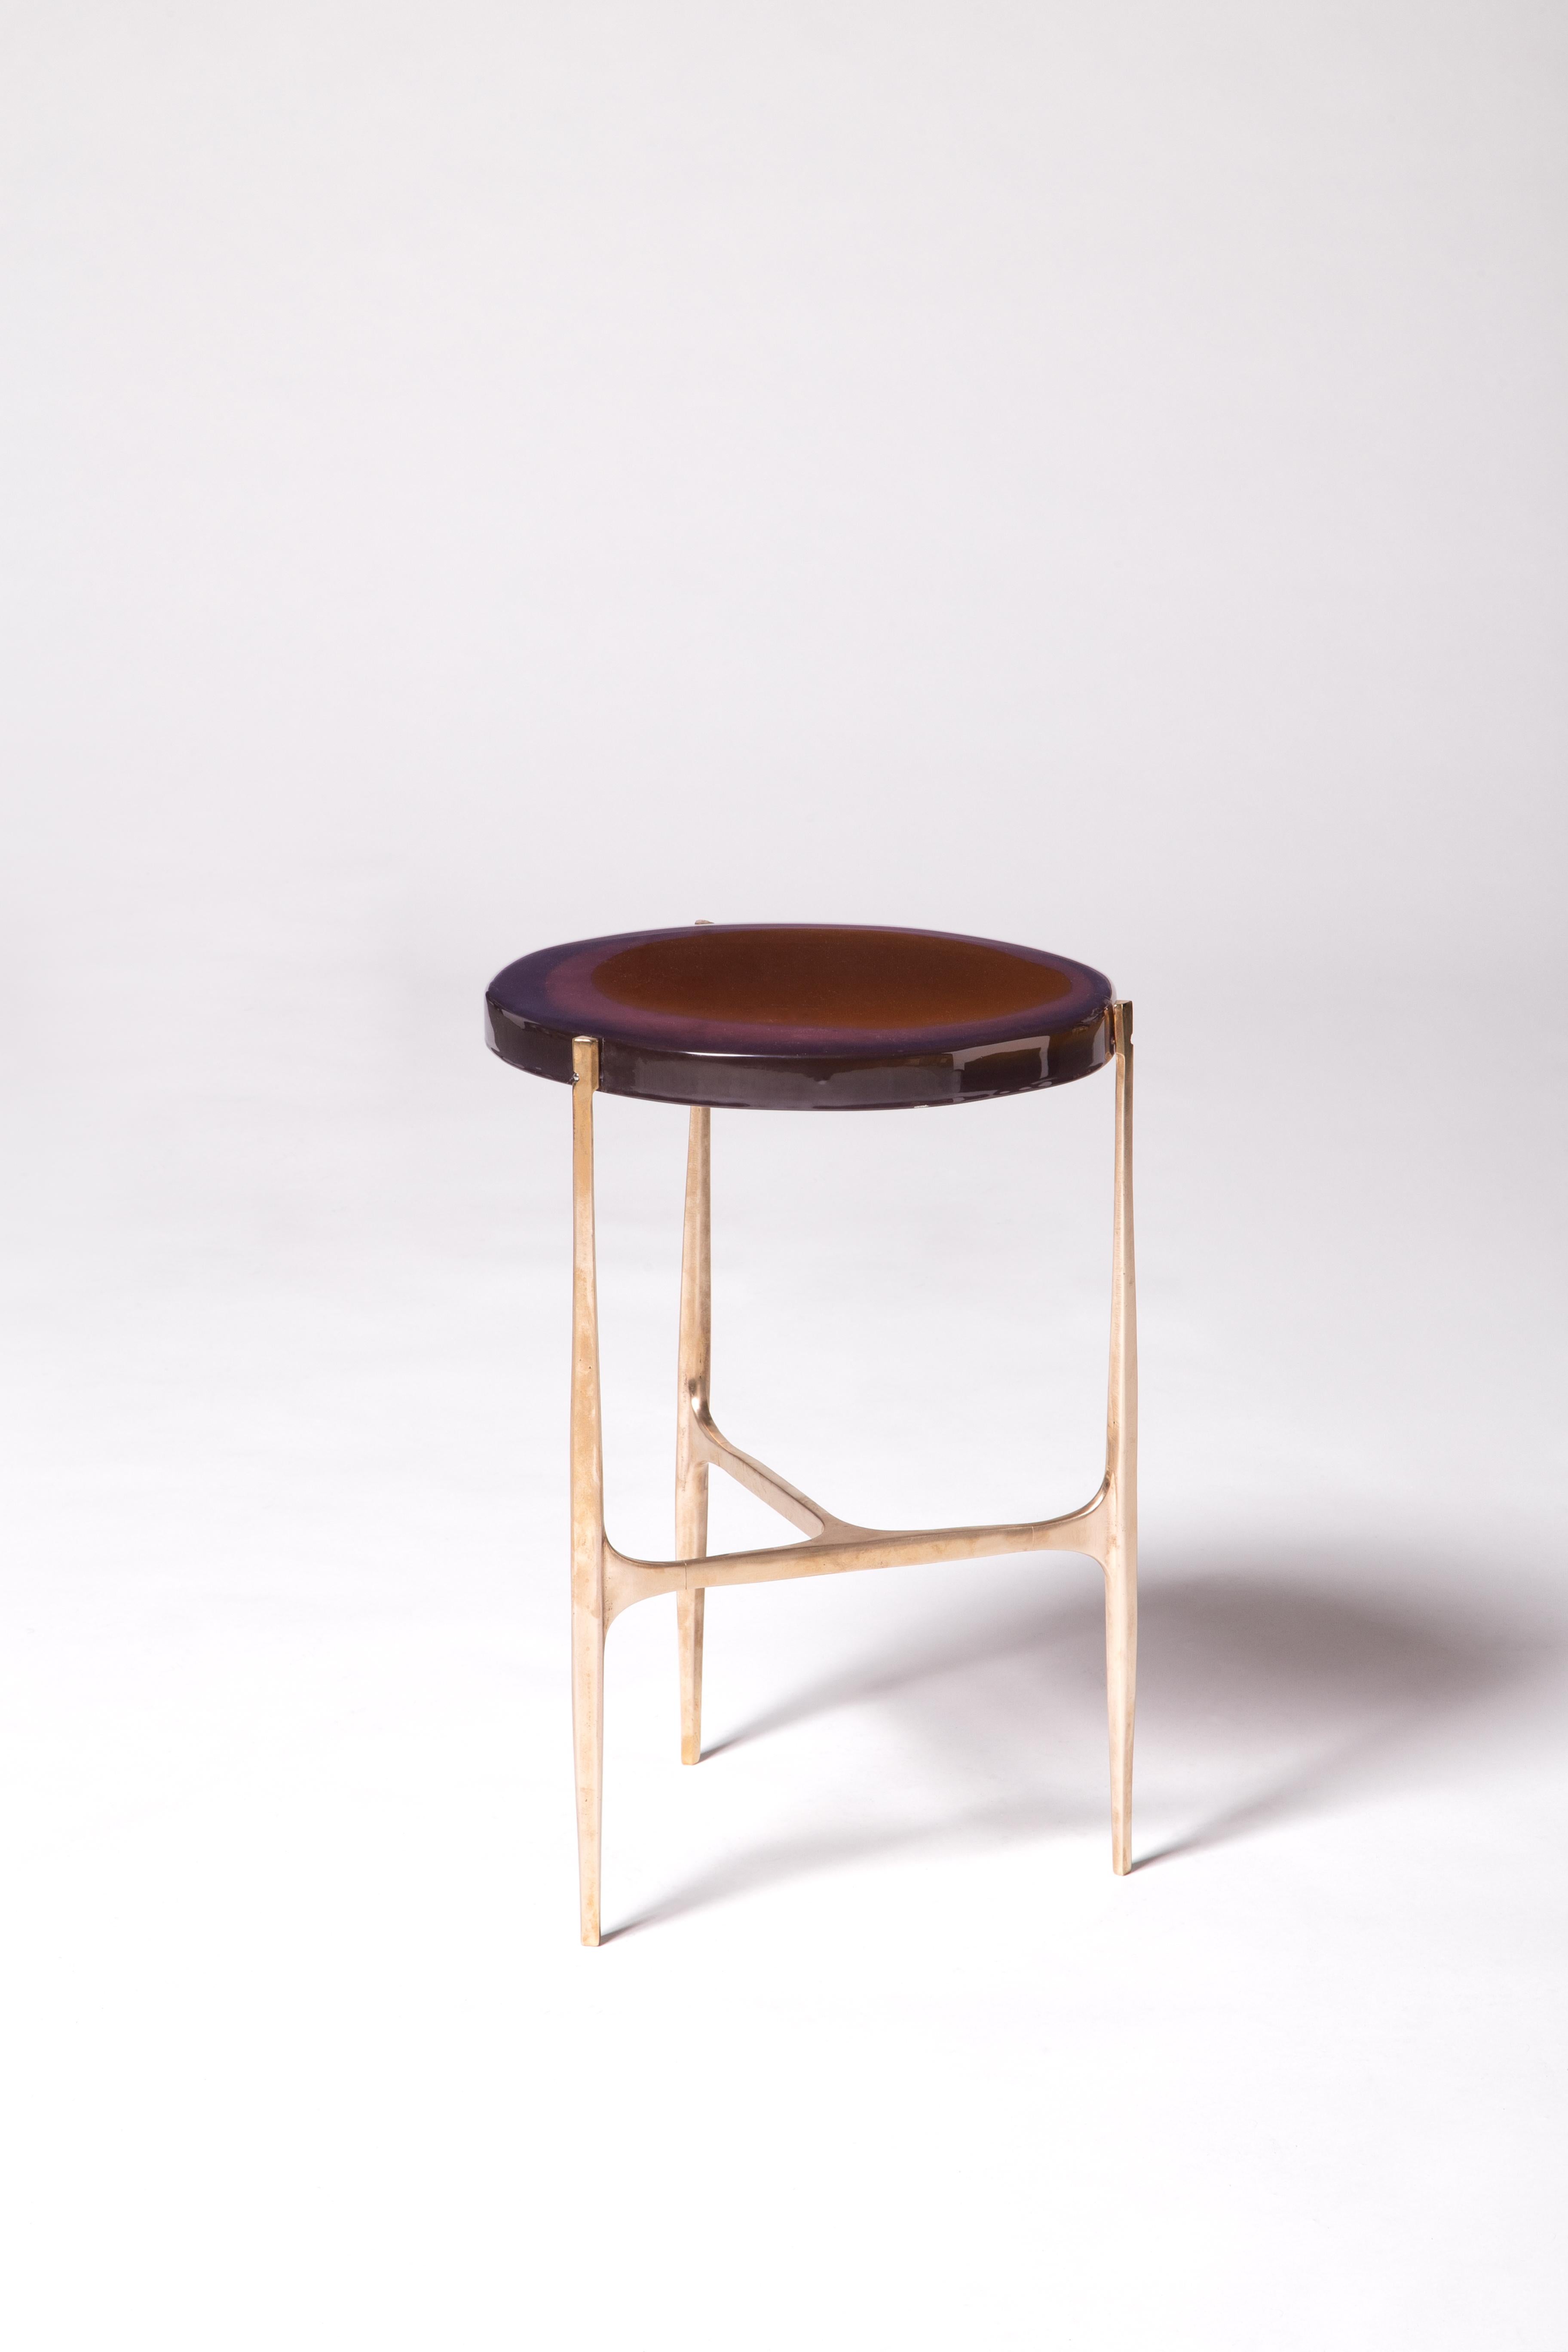 Agatha coffee table by Draga & Aurel
Dimensions: W 34 x D 34 x H 50
Top Ø 34 cm
Materials: Resin, bronze

The Agatha coffee tables are featured by irregular circular tops of transparent and
colorful resin sit on a bronze frame with a staggered